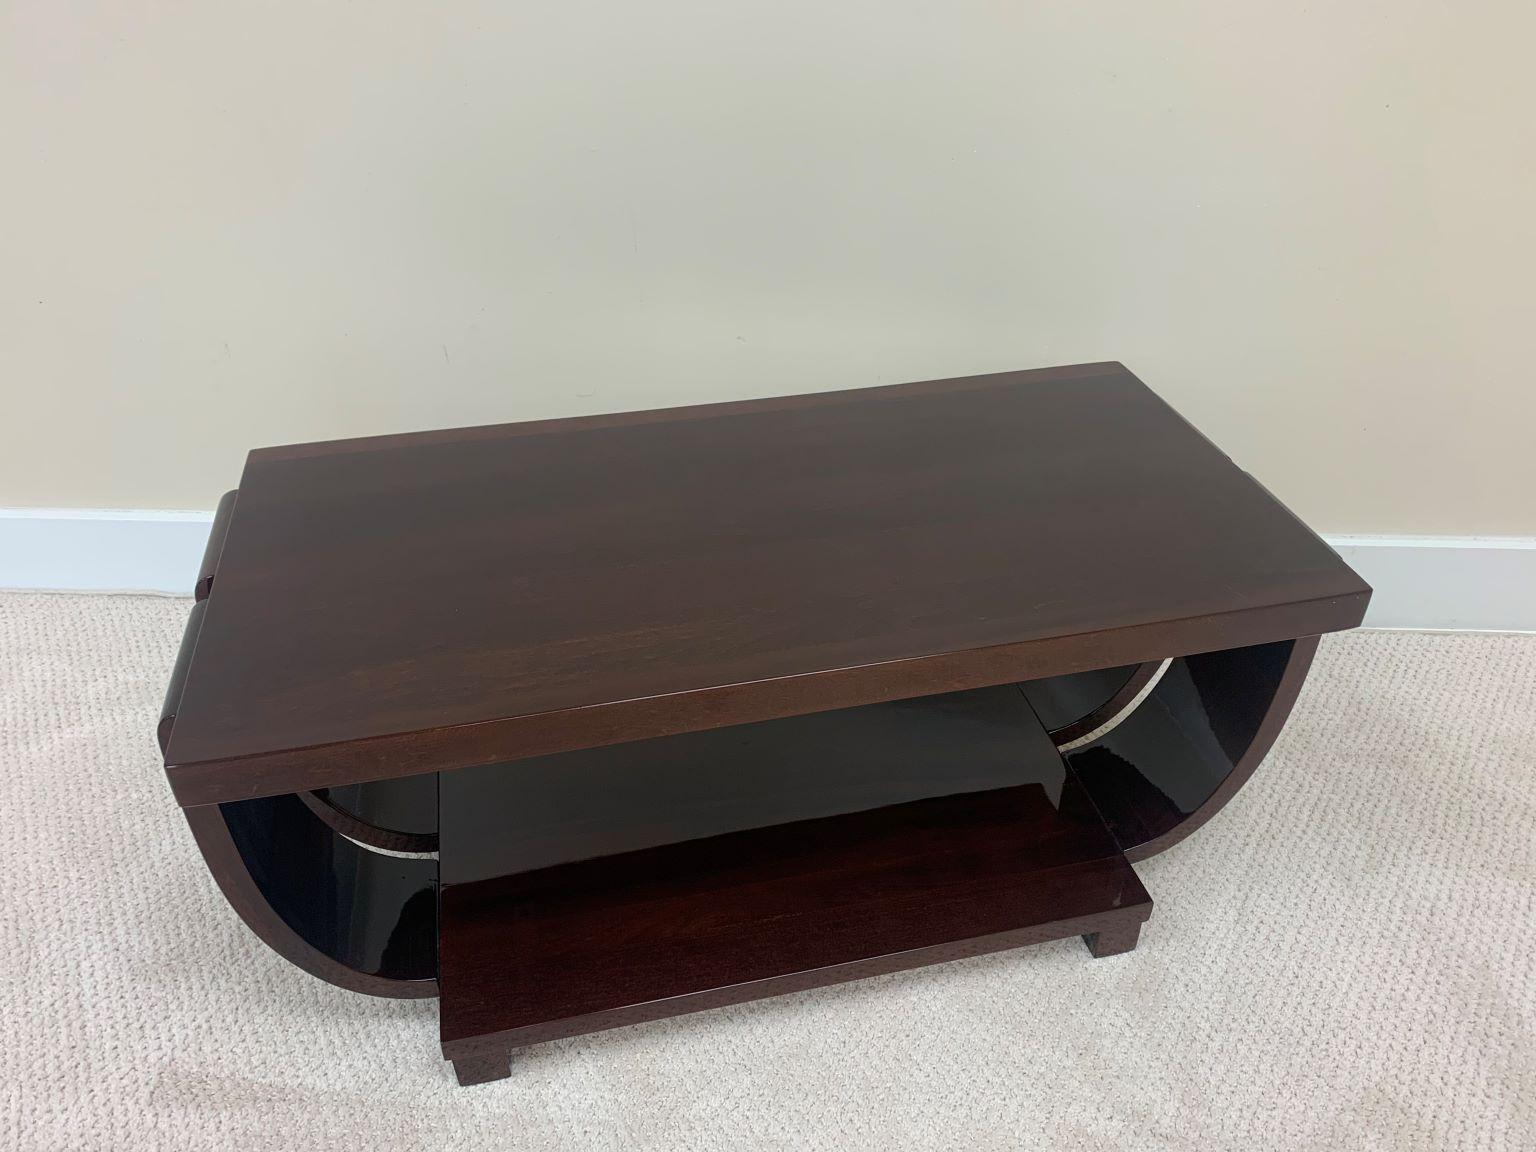 Art Deco Cocktail Table by Modern Age Furniture Company Attr. Brown Saltman 1